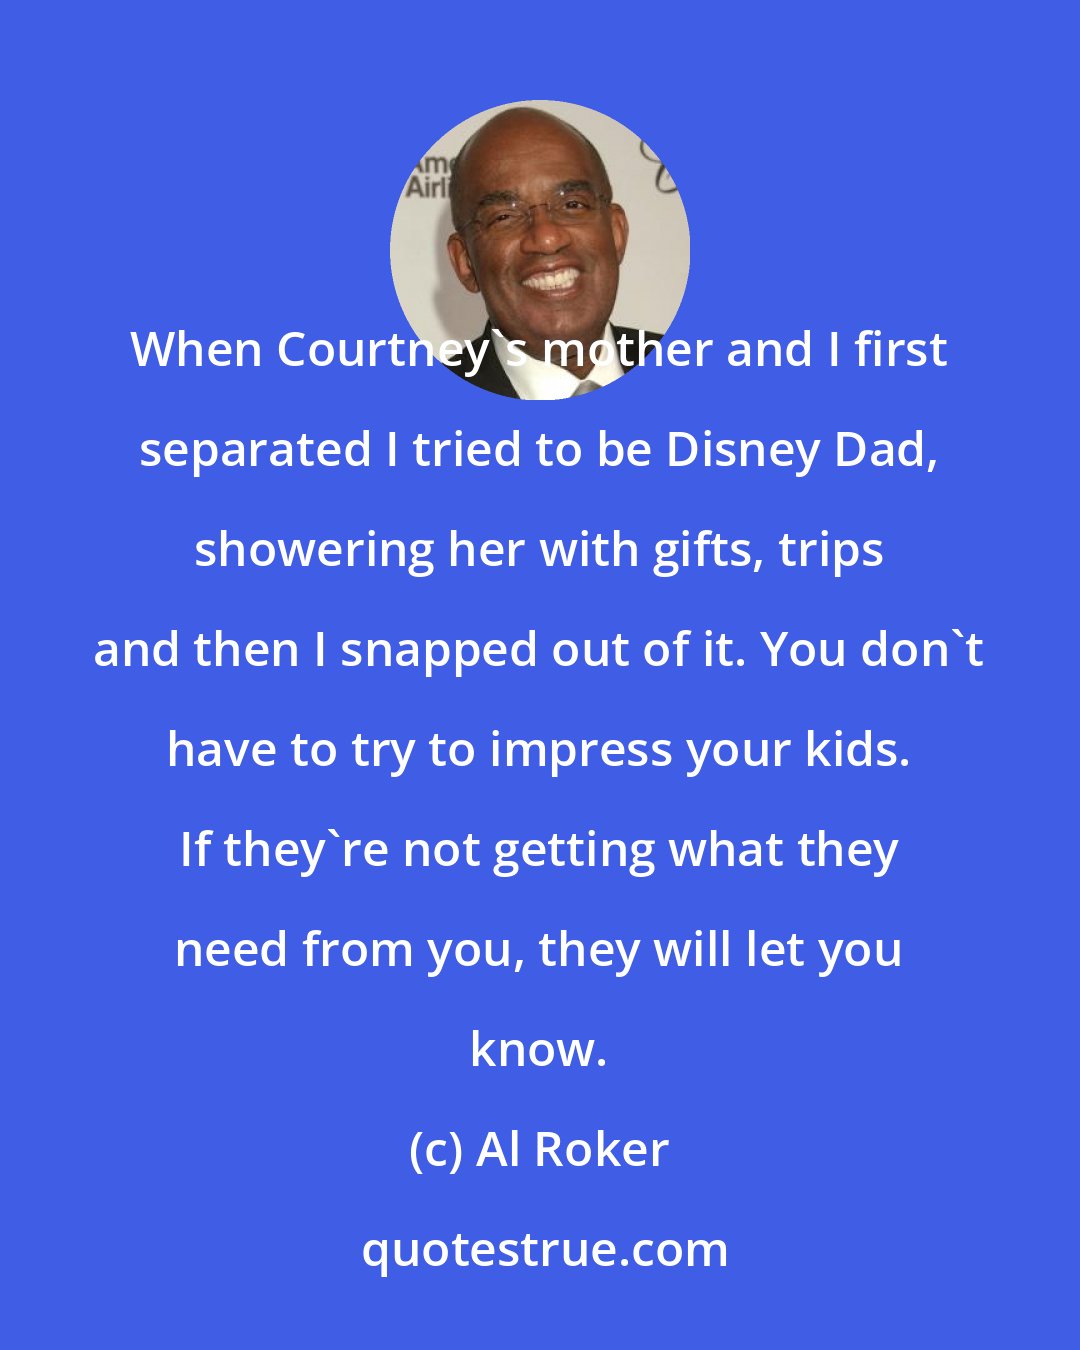 Al Roker: When Courtney's mother and I first separated I tried to be Disney Dad, showering her with gifts, trips and then I snapped out of it. You don't have to try to impress your kids. If they're not getting what they need from you, they will let you know.